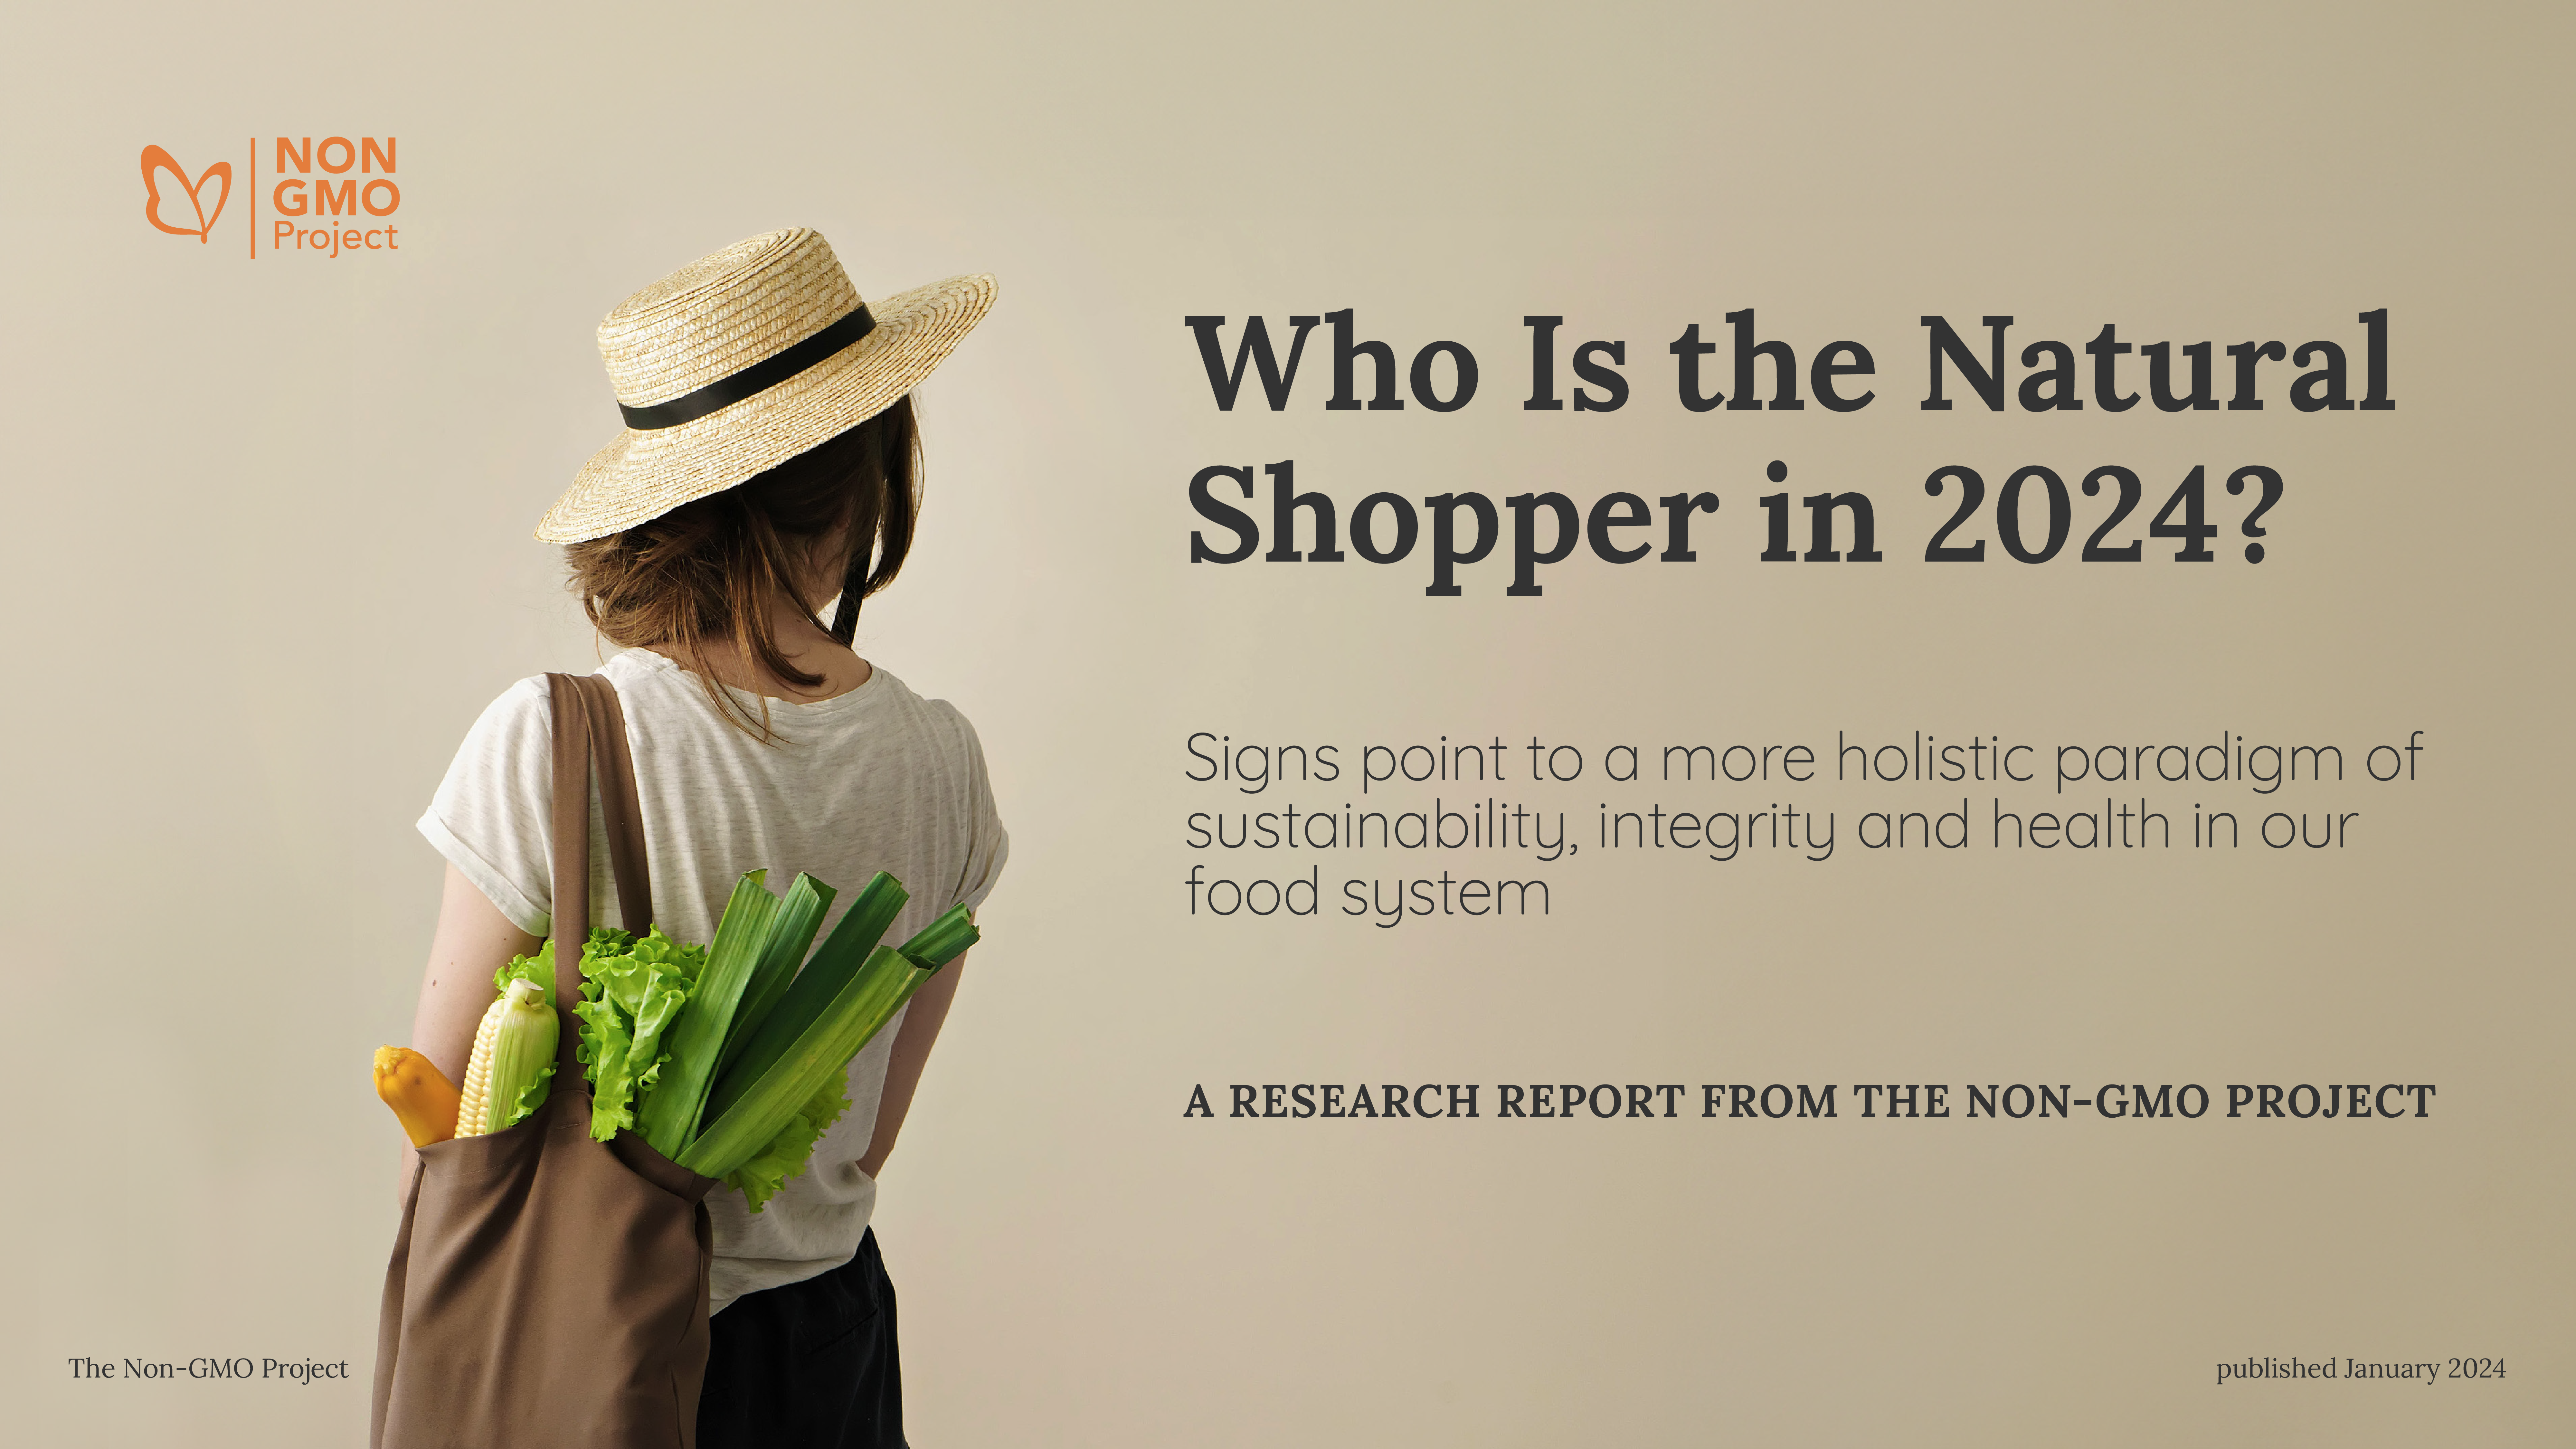 The Natural Shopper, a research report by Non-GMO Project